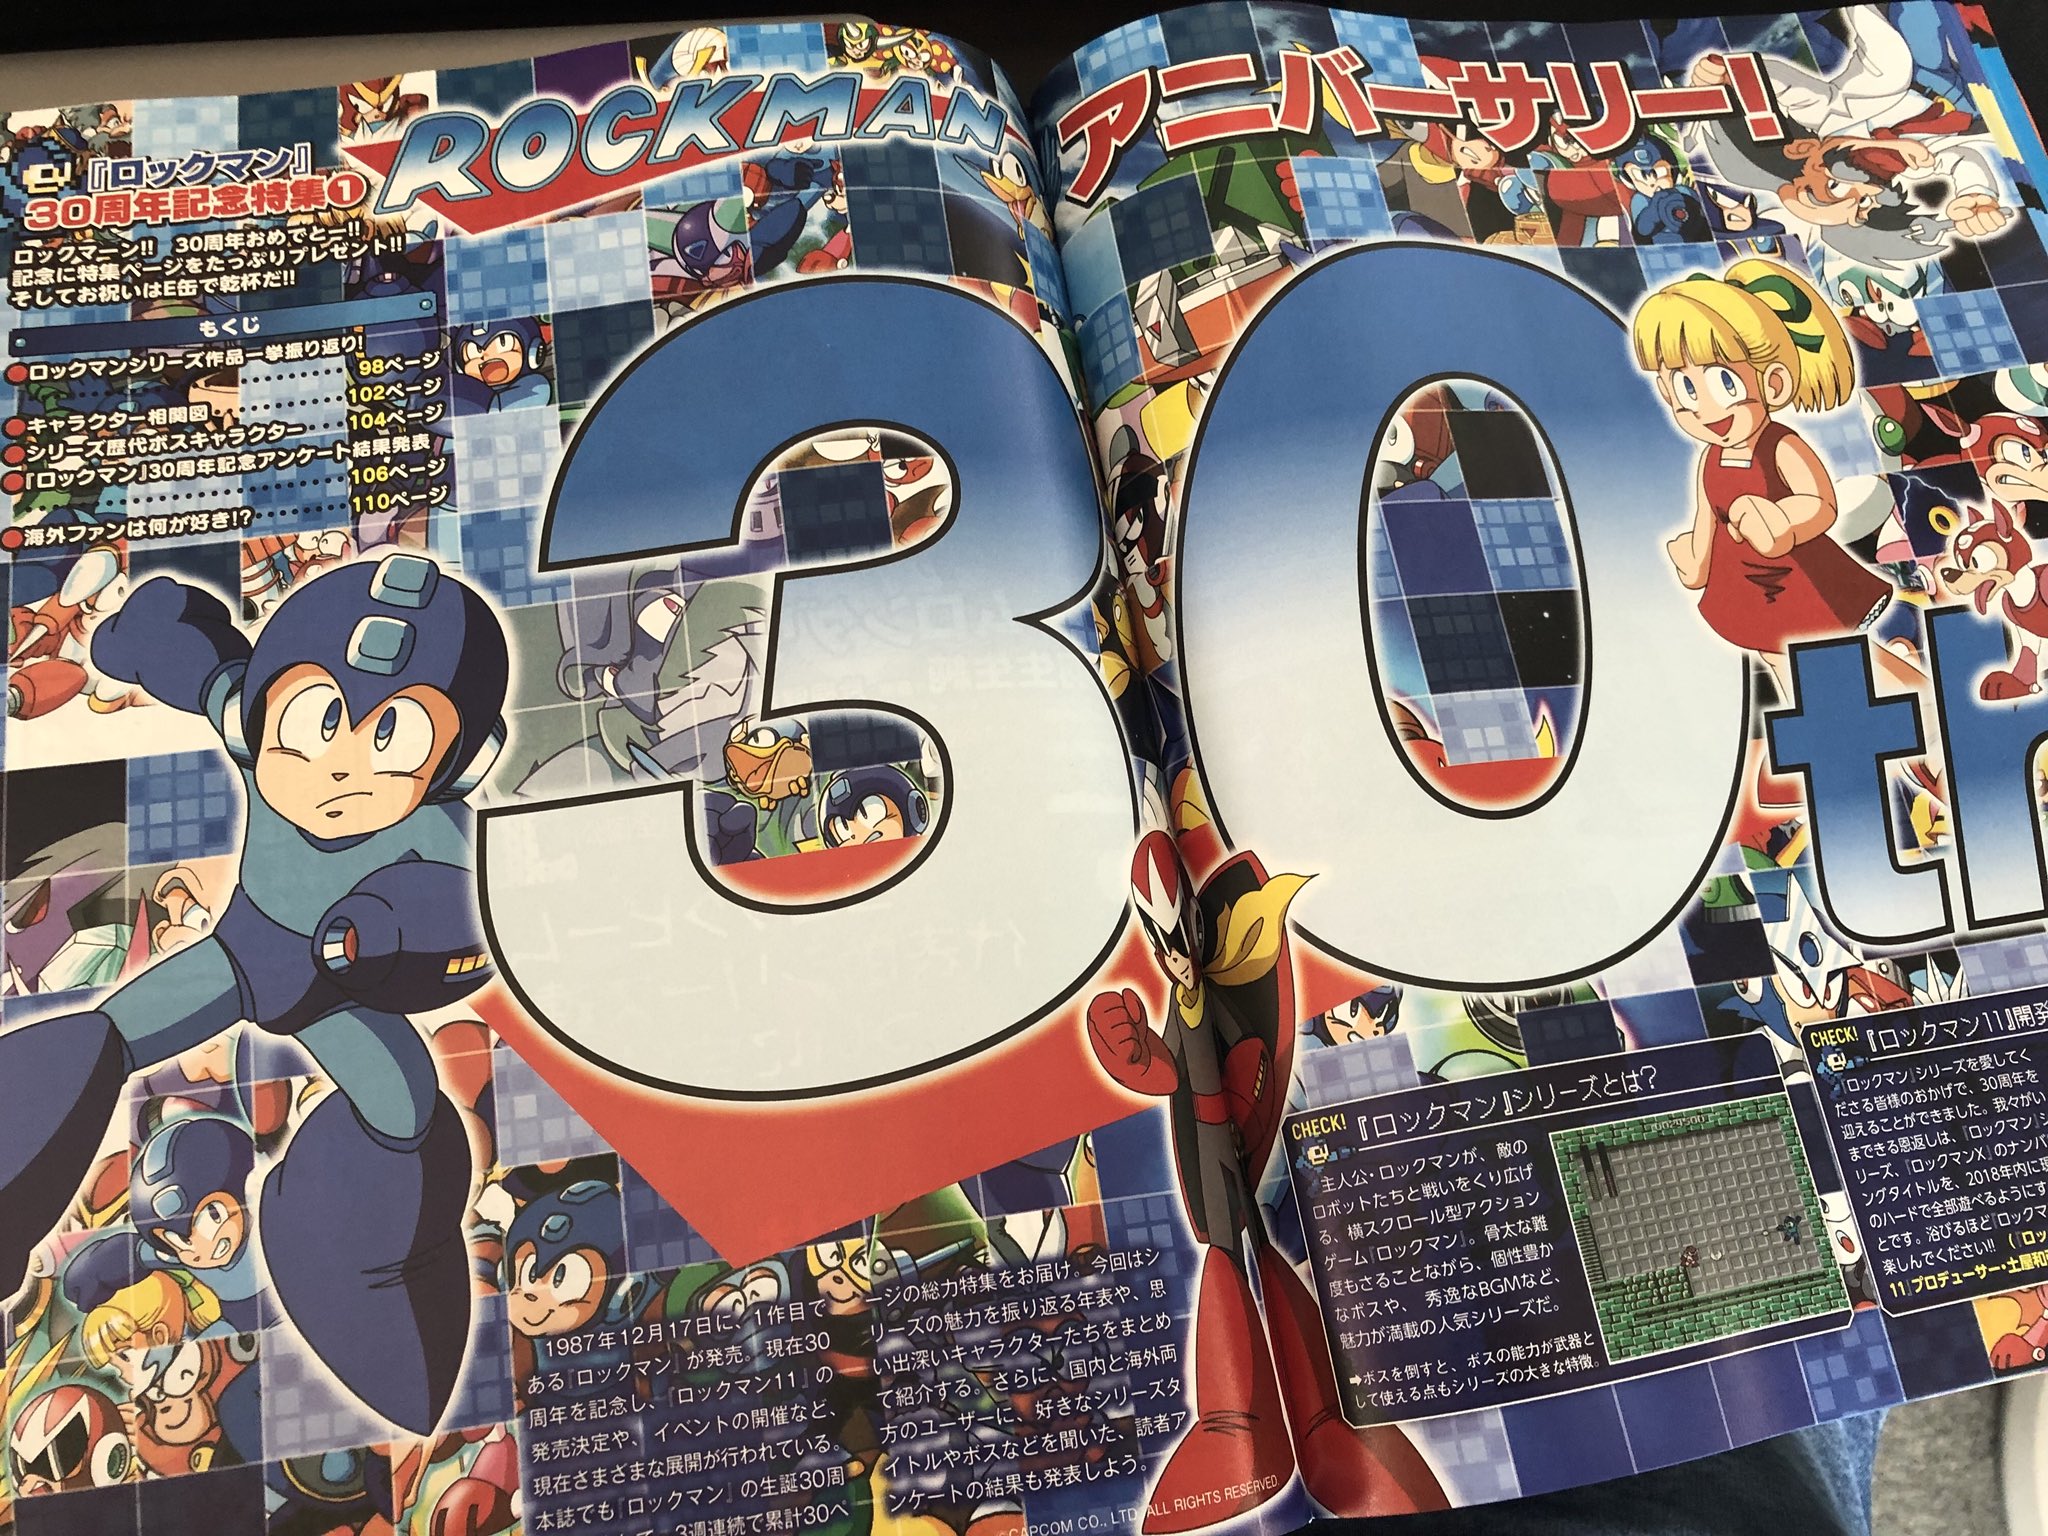 John Ricciardi Amazing 18 Page Rockman Mega Man 30th Anniversary Love In In The New Famitsu Including Comments From Overseas Fans T Co 4jmeouxcrr